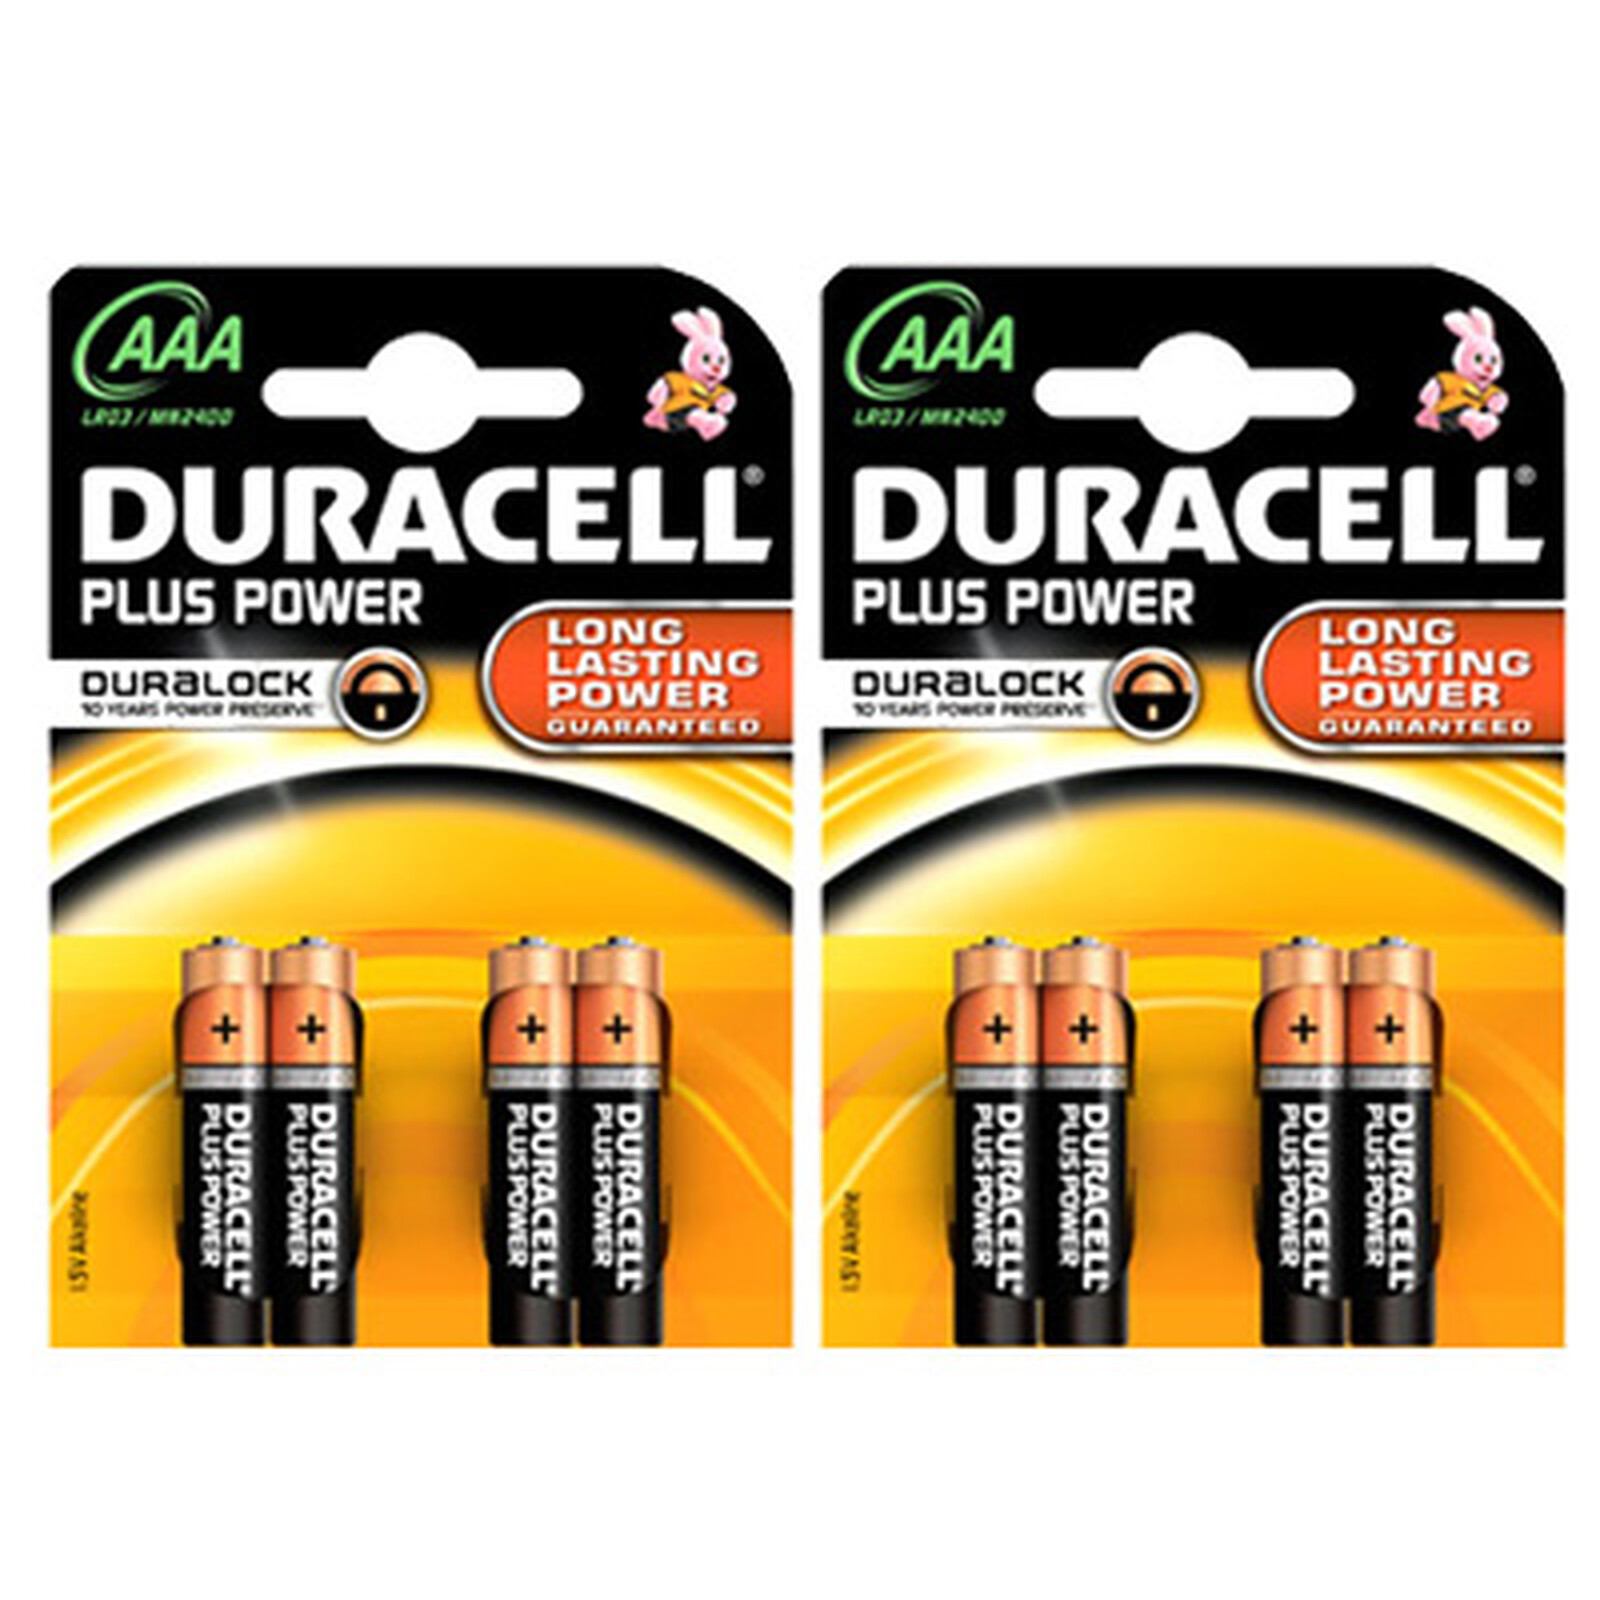 Duracell Plus Power AAA (2x4) - Pile & chargeur - LDLC